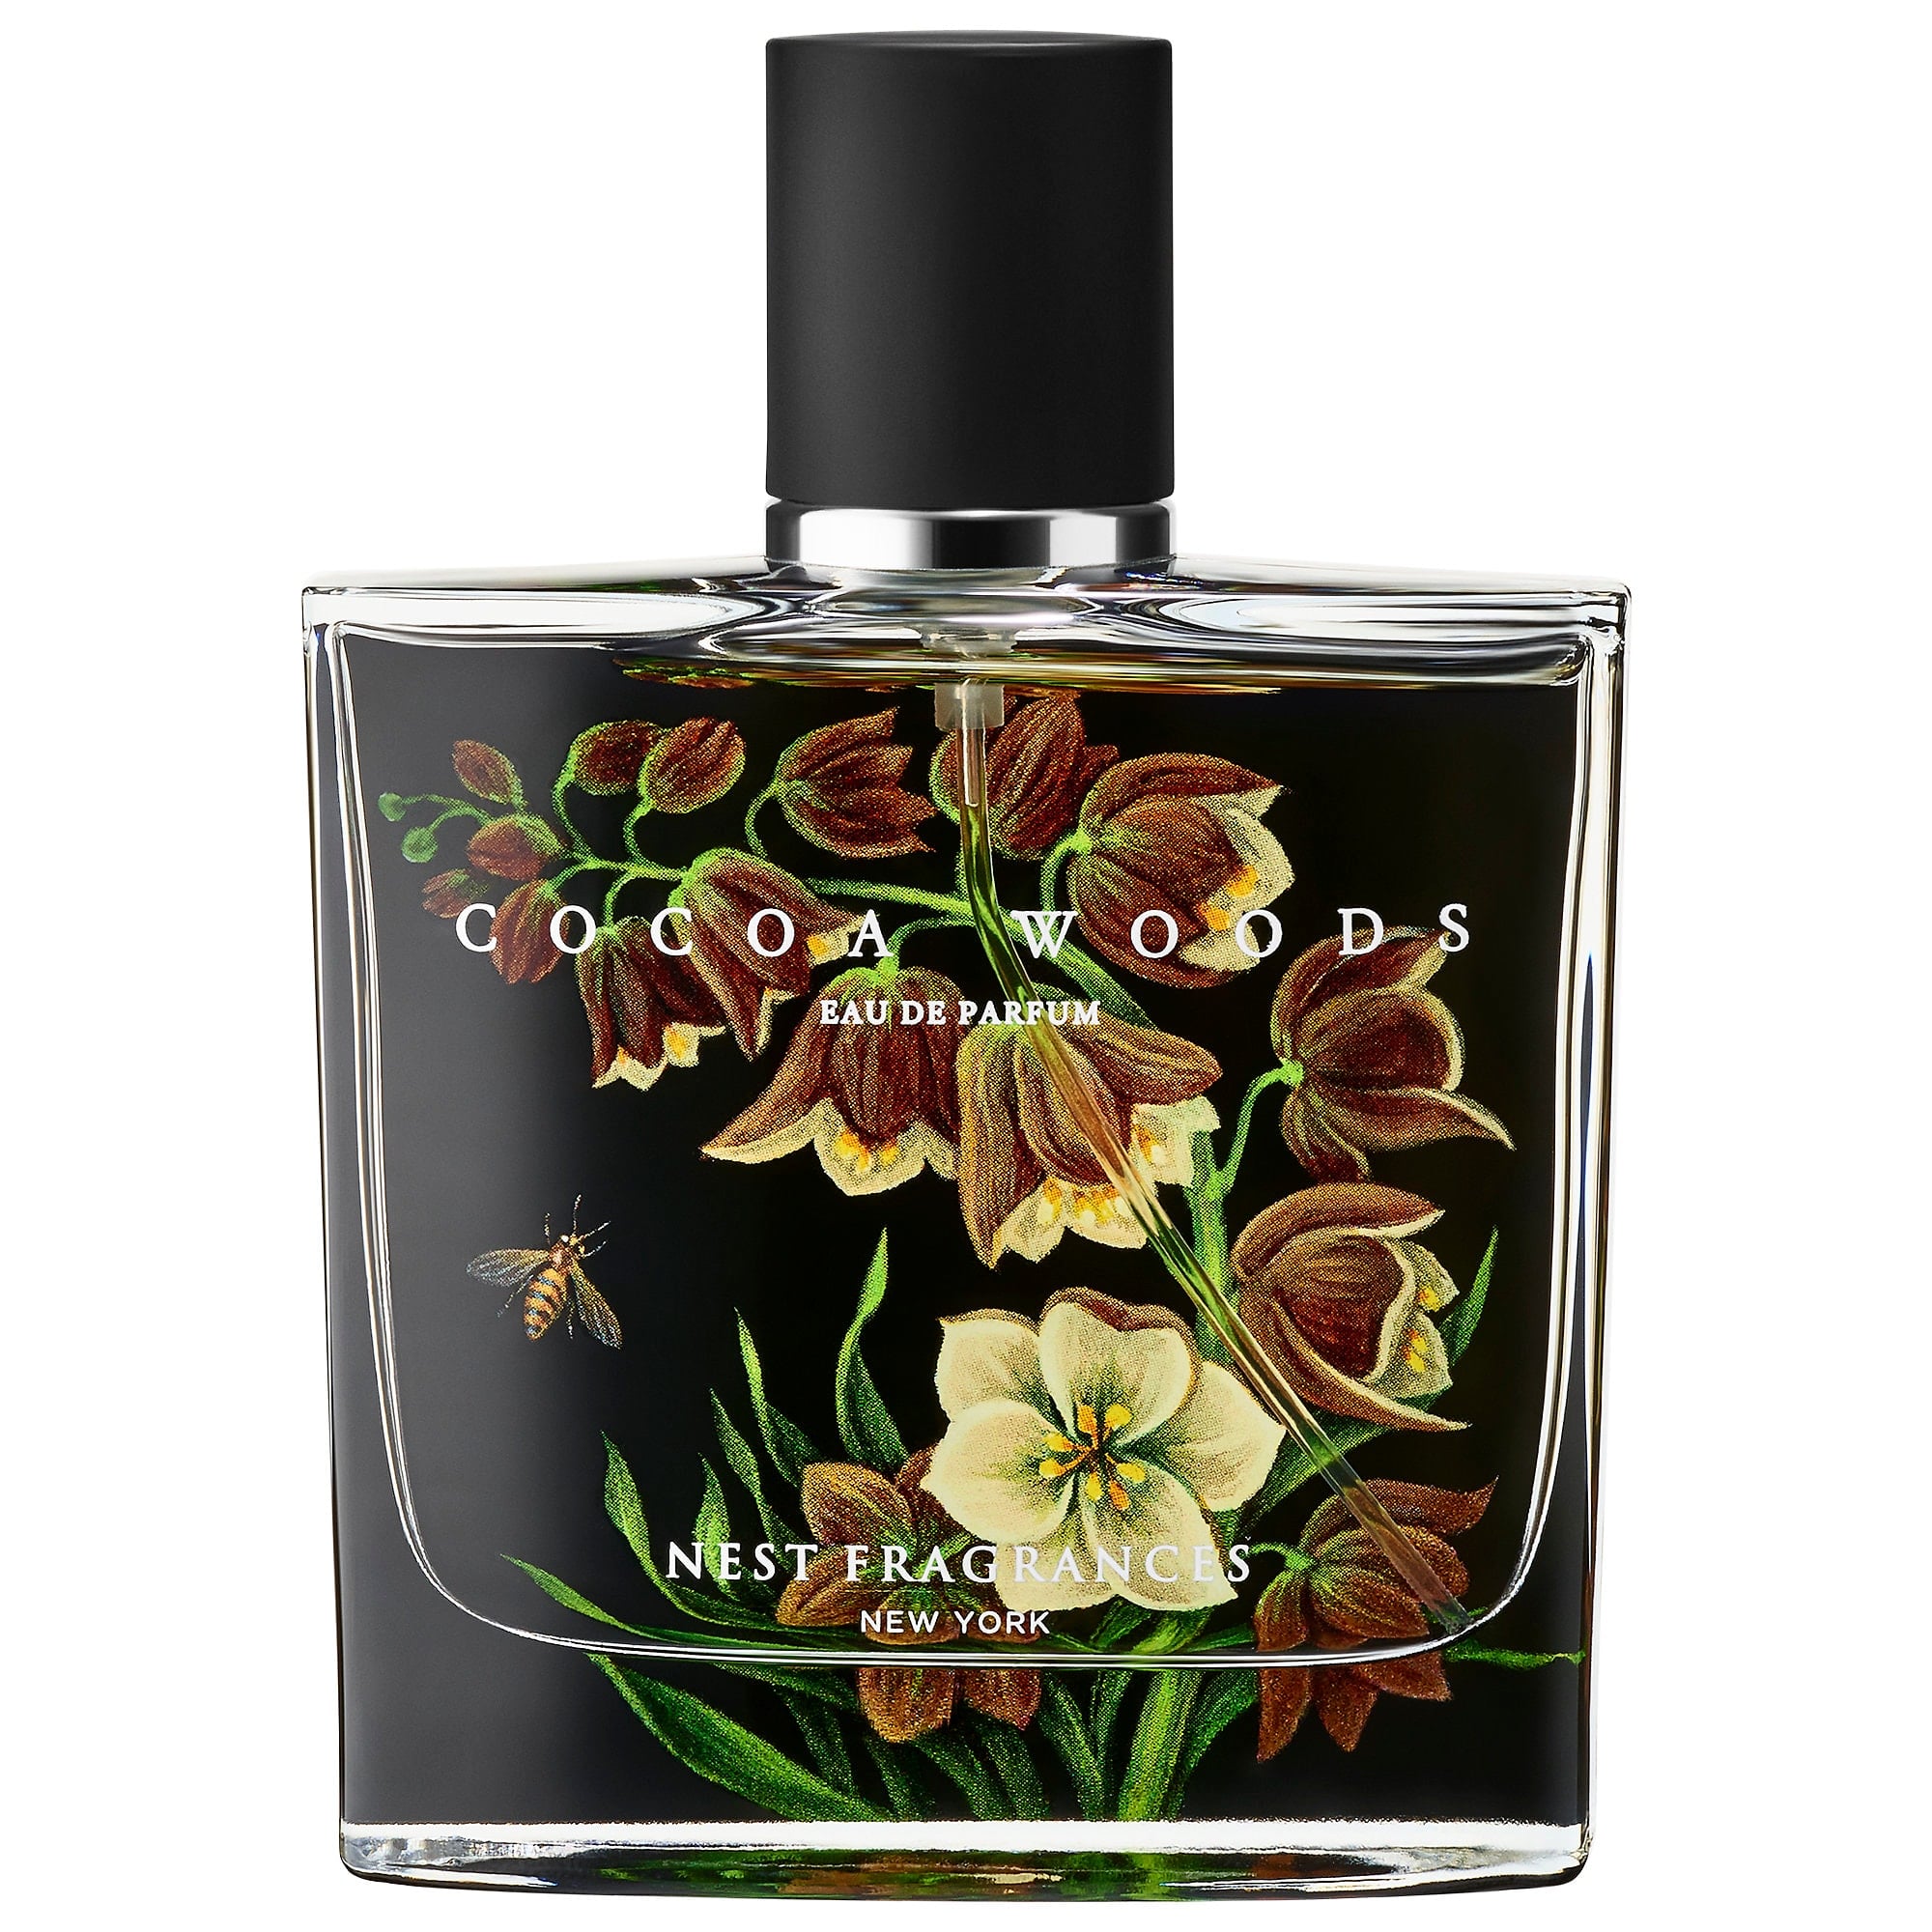 Chocolate Fragrance Note